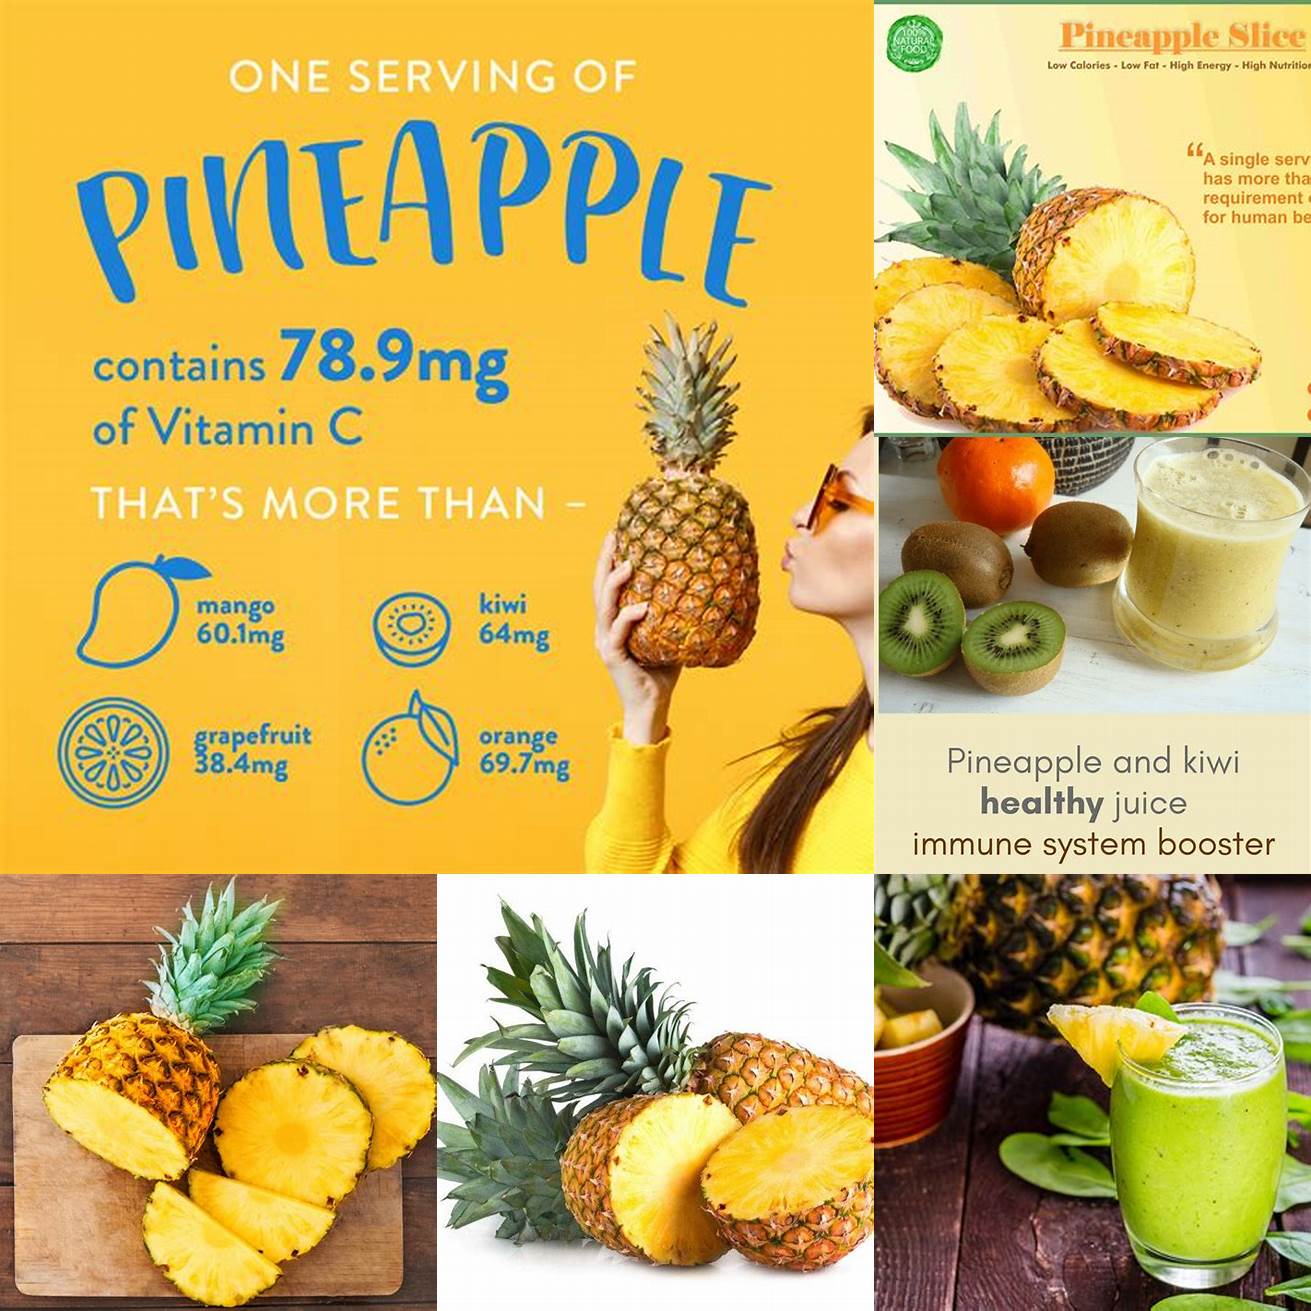 Boosts Immune System Pineapple is rich in Vitamin C which is a powerful antioxidant that helps protect the body against disease and infection